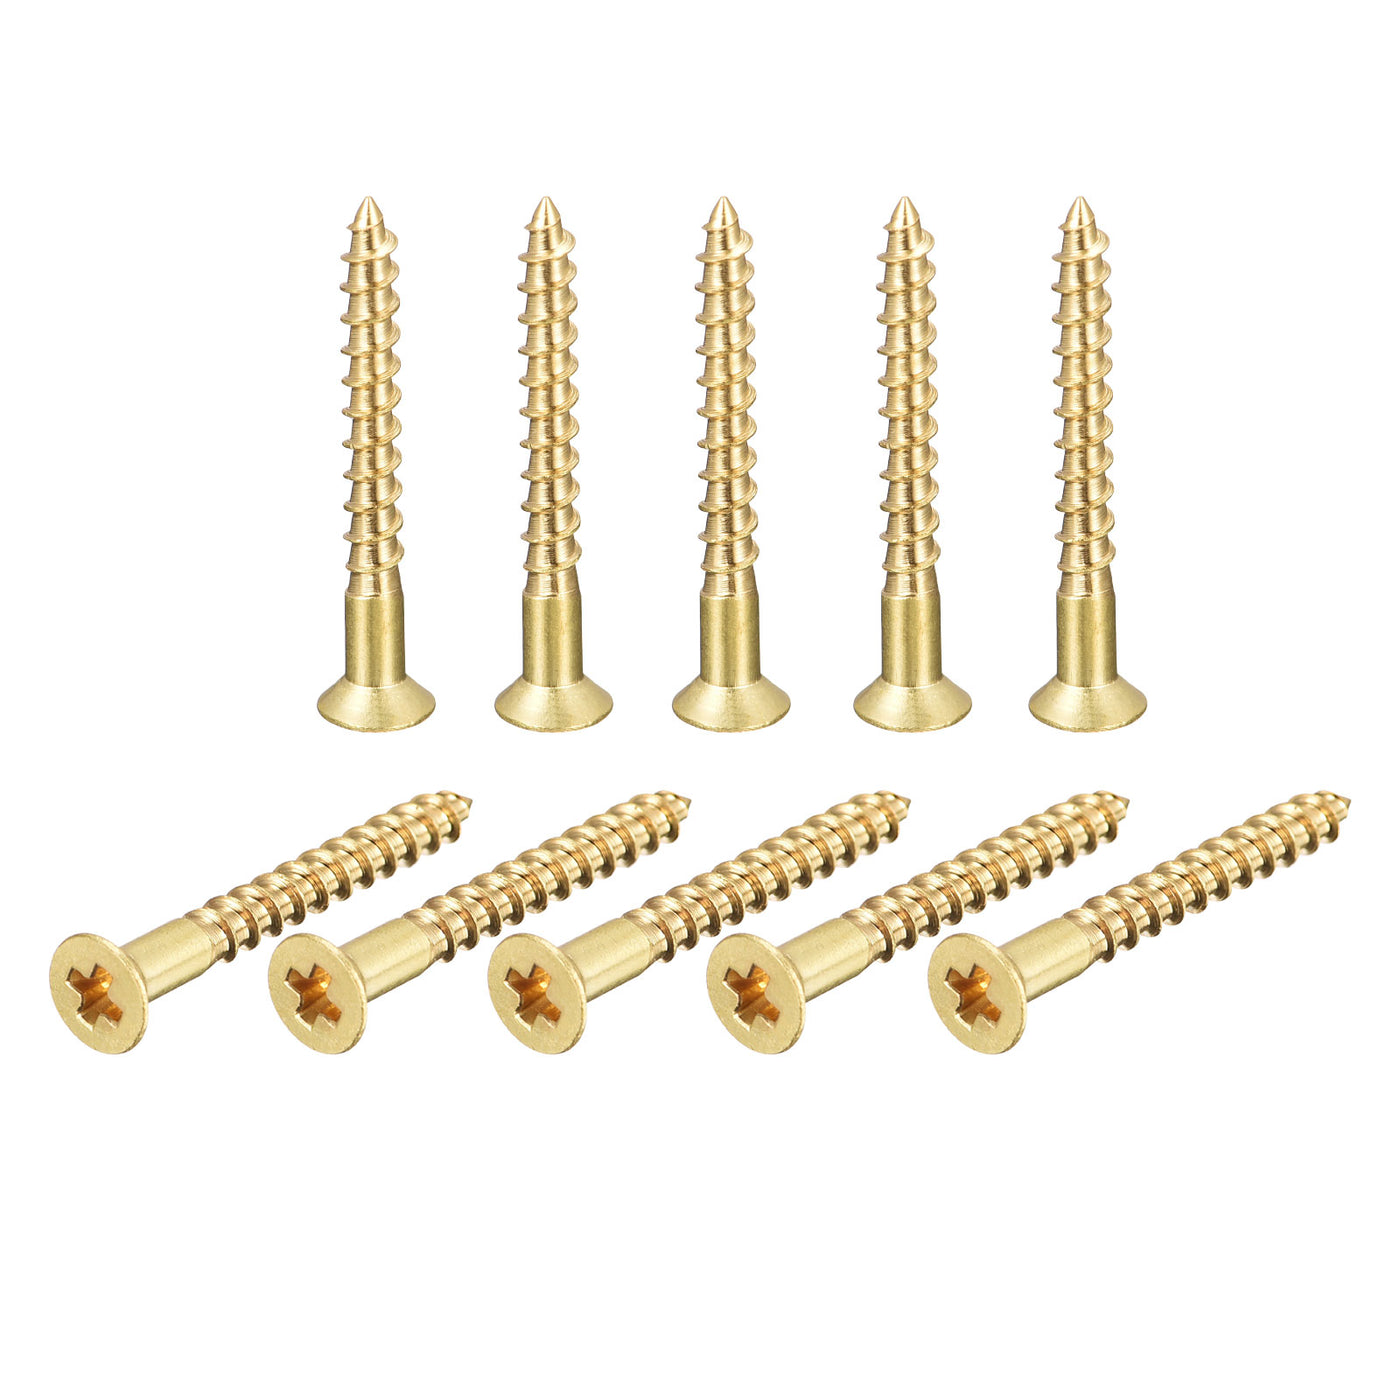 Uxcell Uxcell Brass Wood Screws, M3x25mm Phillips Flat Head Self Tapping Connector for Door, Cabinet, Wooden Furniture 100Pcs